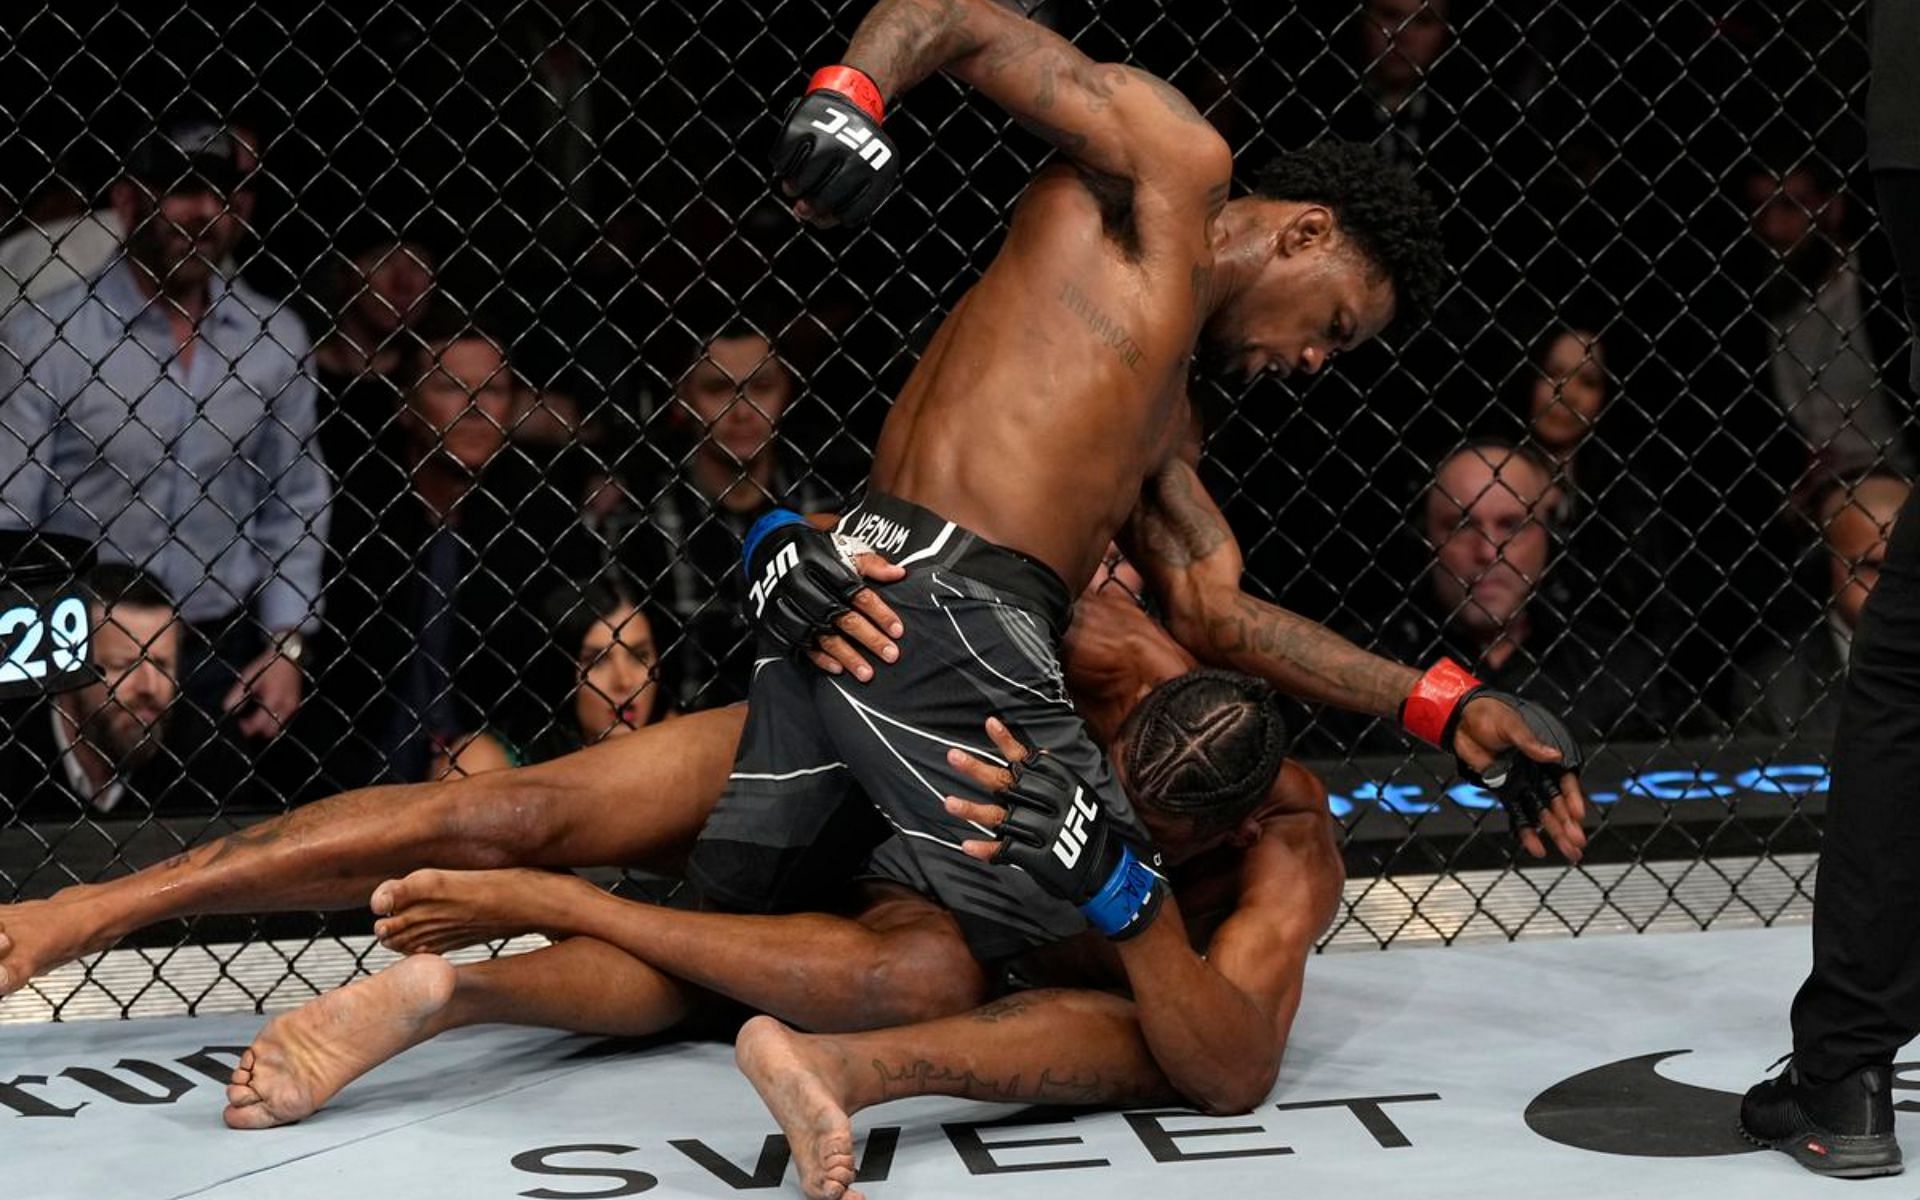 Kevin Holland produced an explosive performance to down Alex Oliveira in his welterweight debut